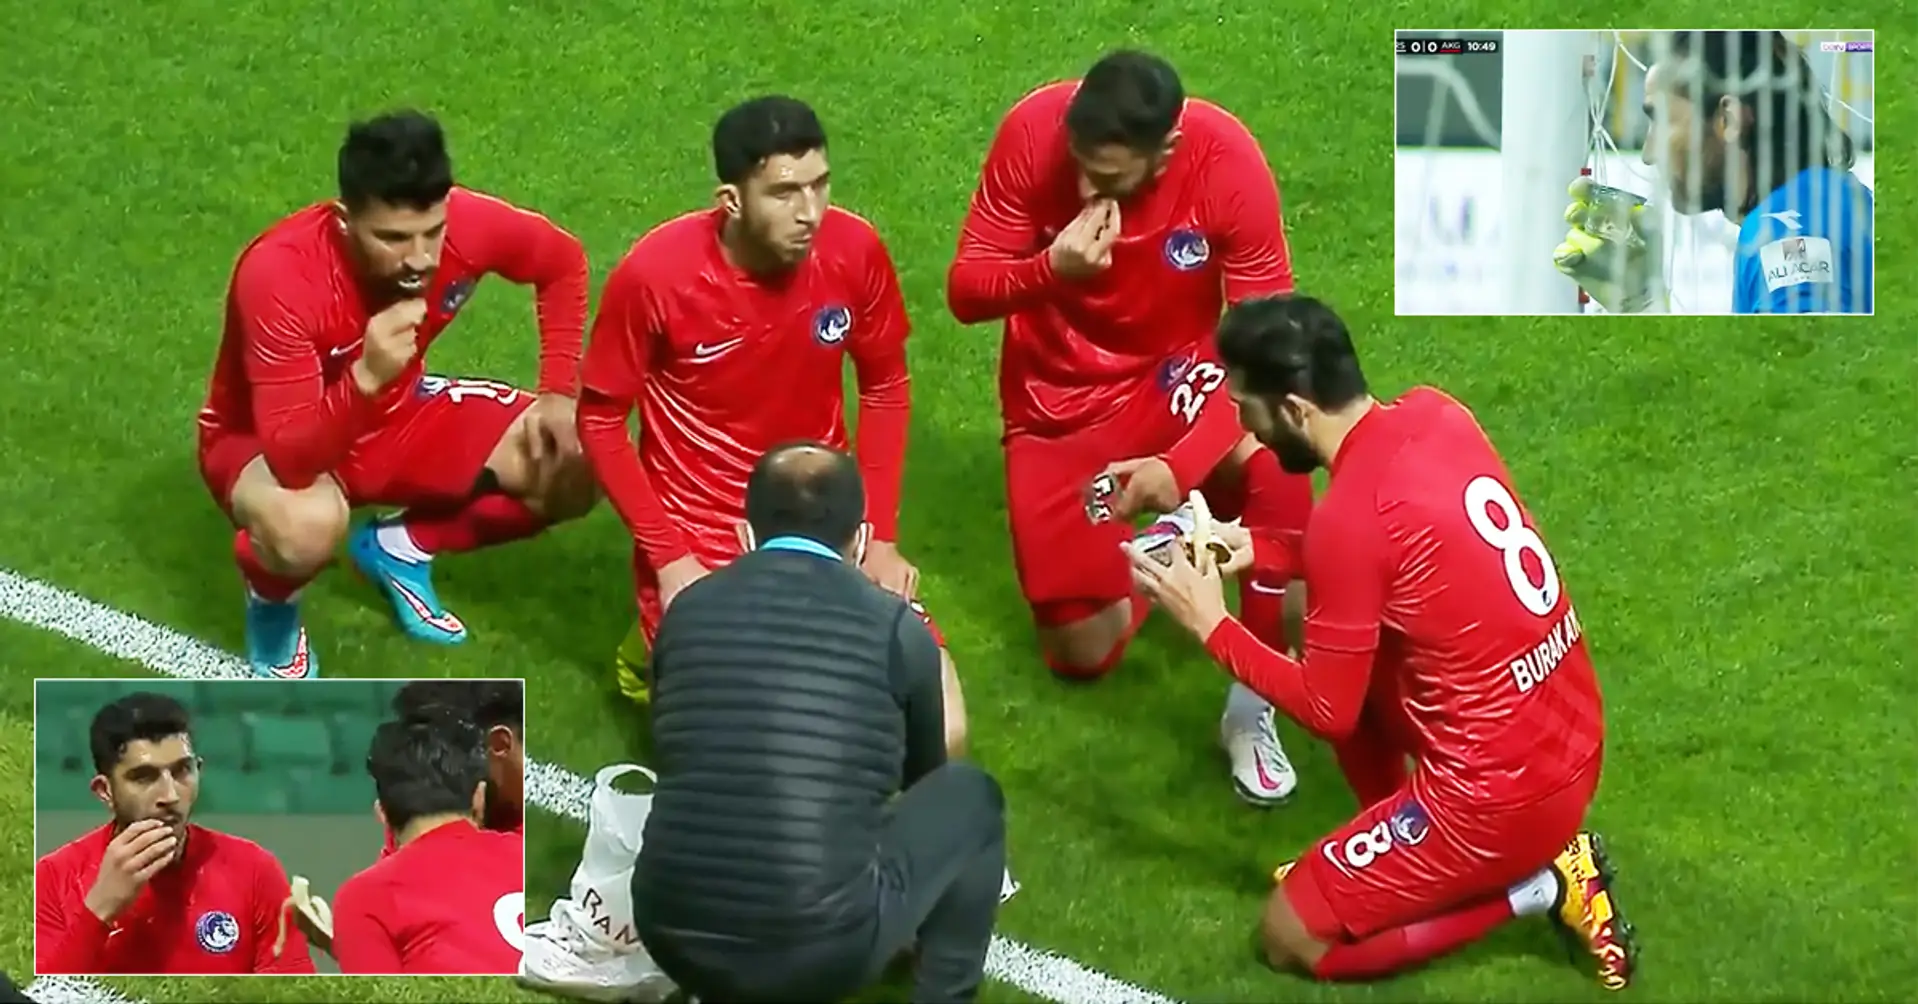 Football match in Turkey stopped so that players could do their Ramadan fast - video goes viral